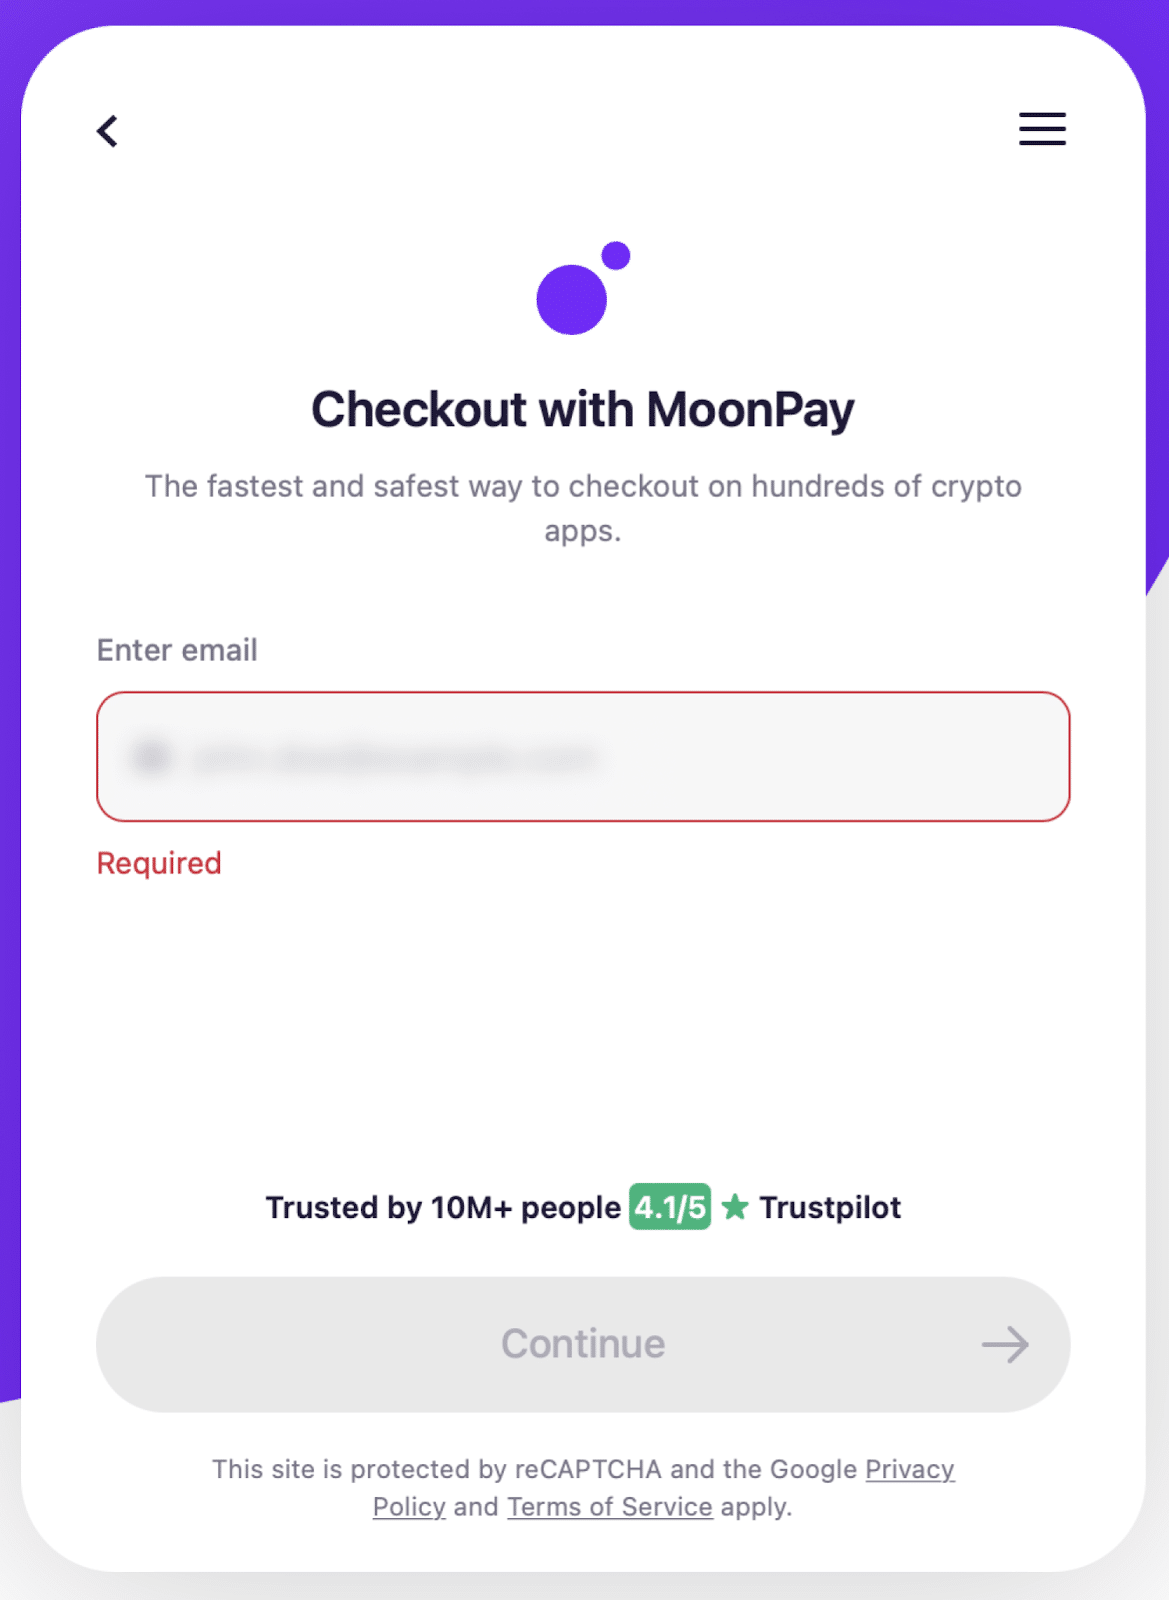 Checkout with MoonPay window